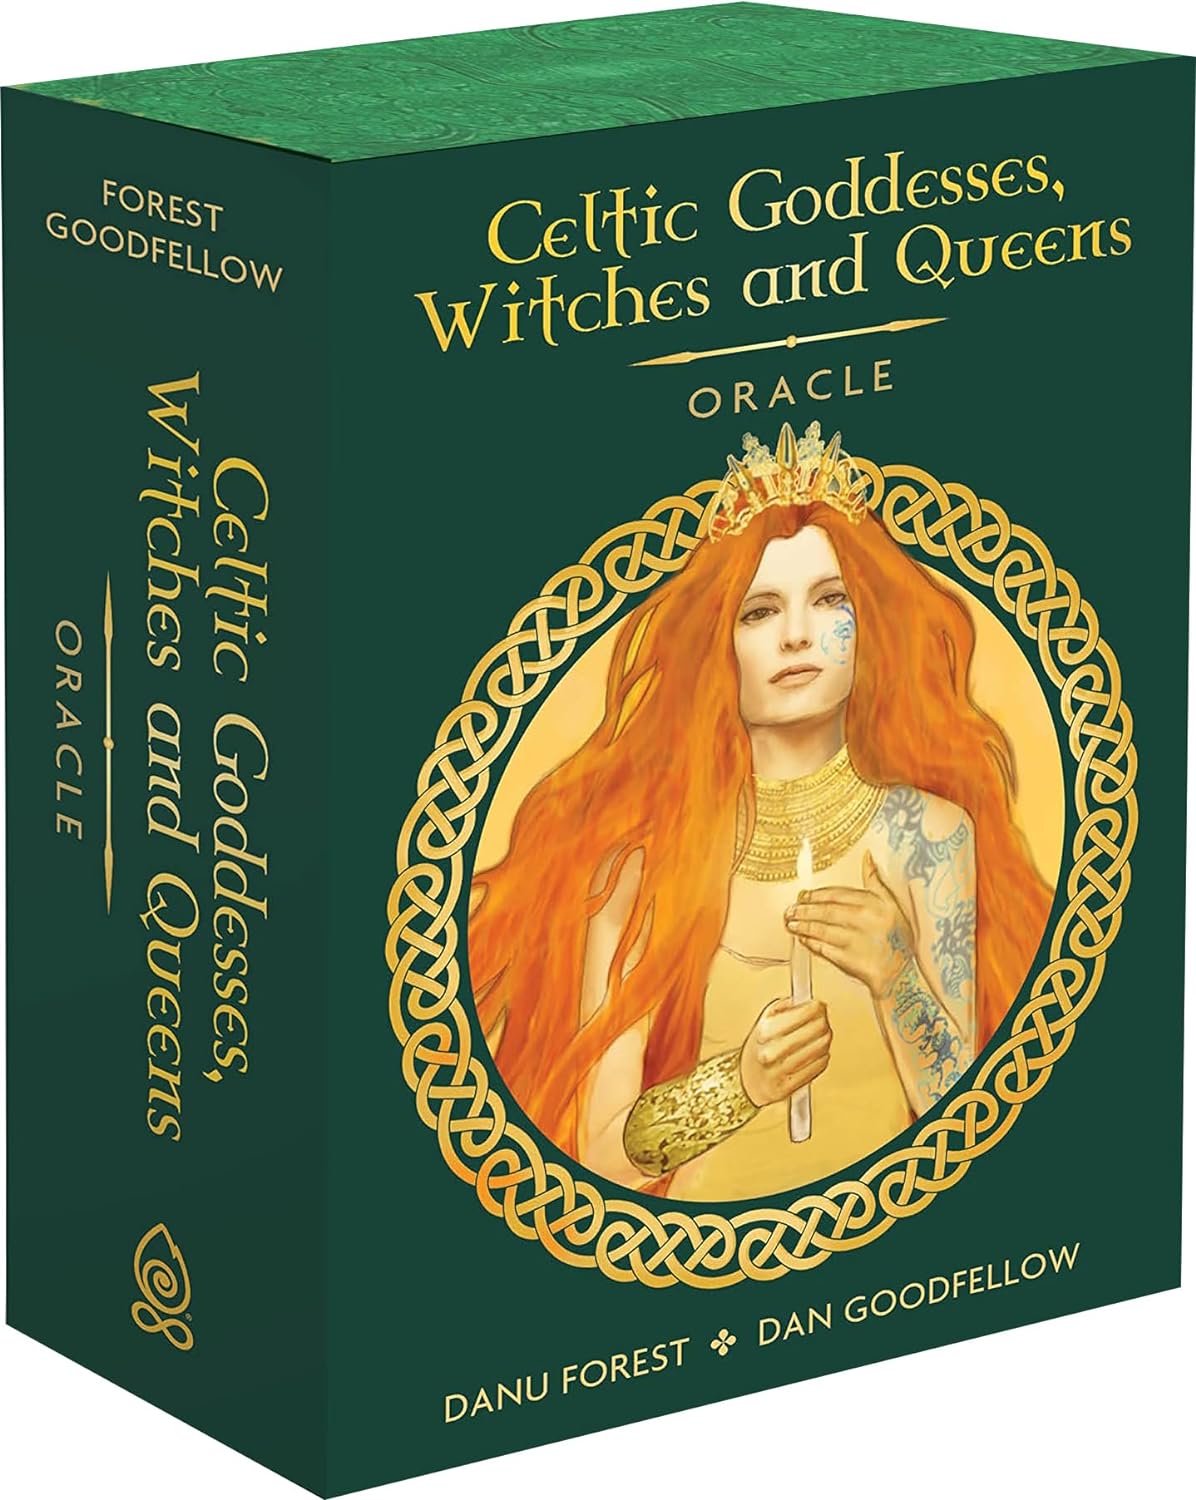 Celtic Goddesses, Witches, and Queens Oracle by Danu Forest, illustrated by Dan Goodfellow